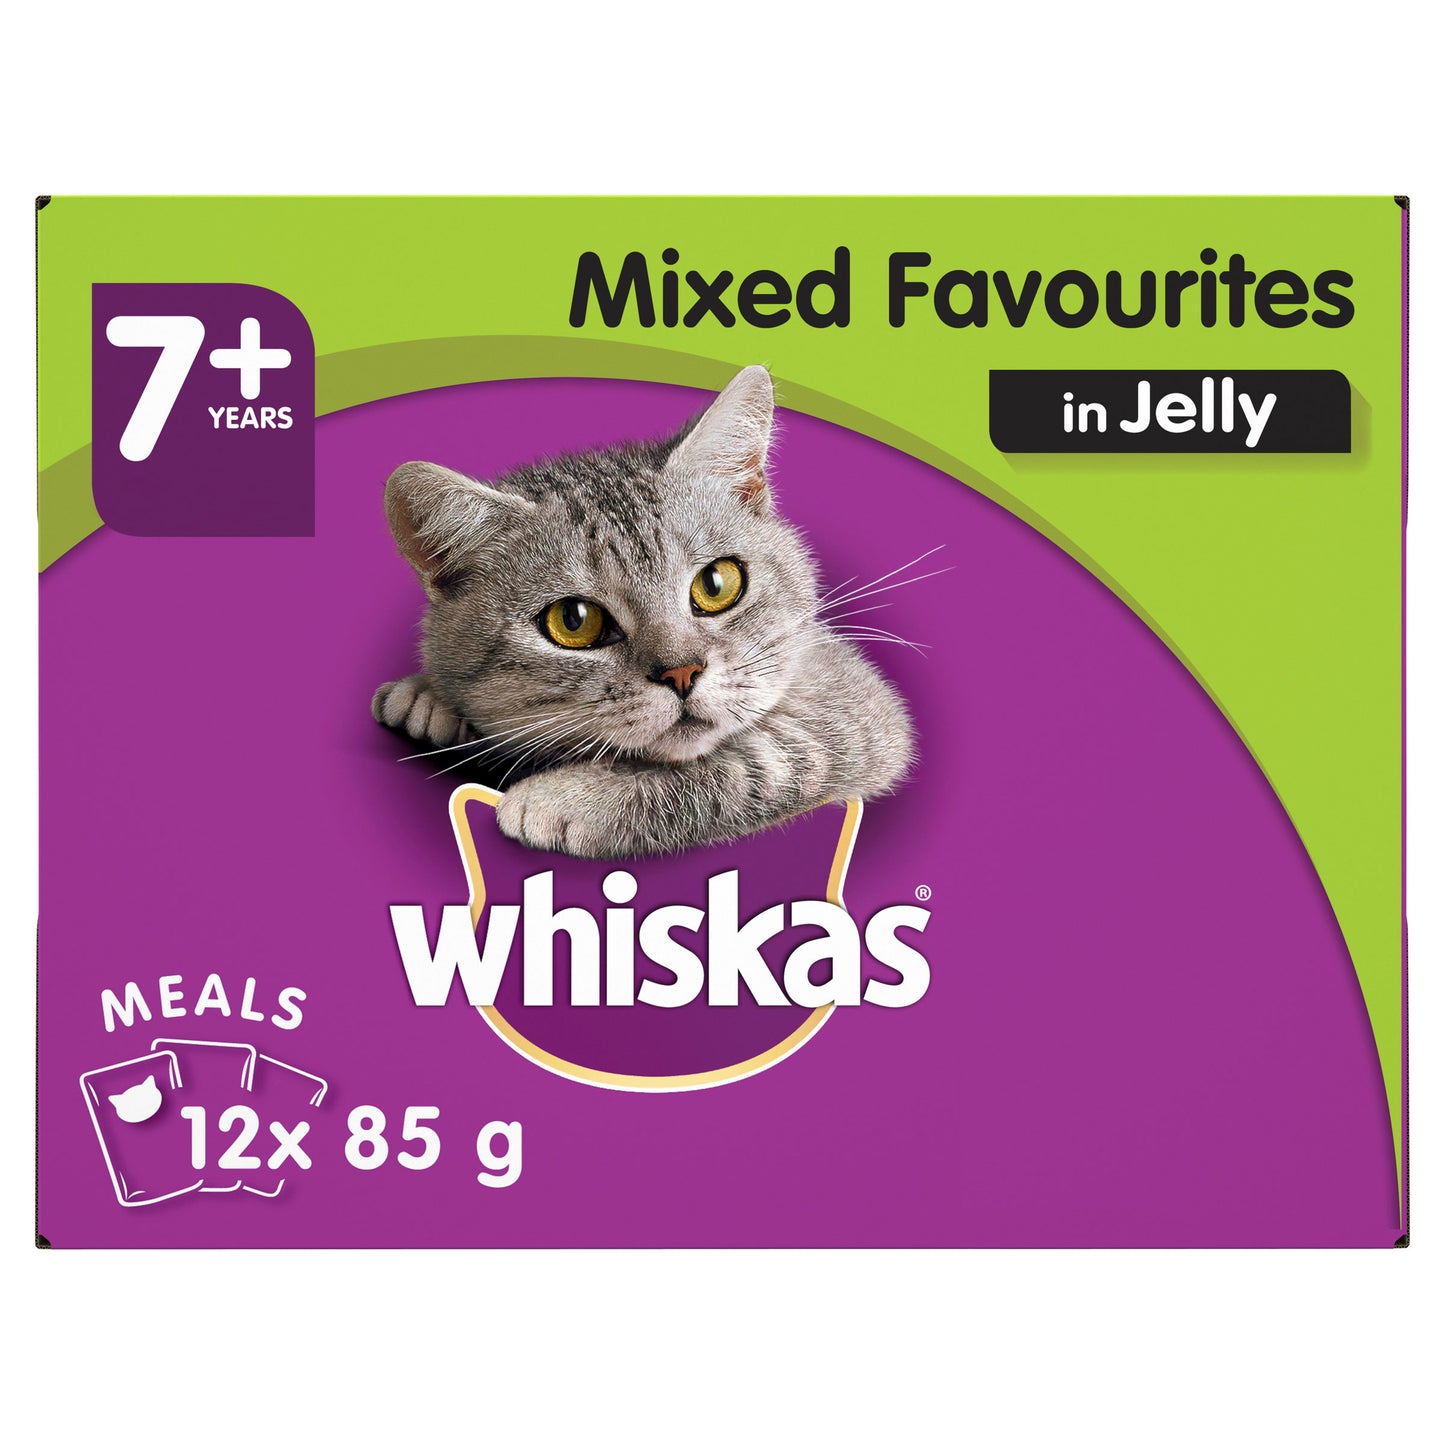 Whiskas Favourites Cat Senior 7+ Years Mixed In Jelly 12x85g